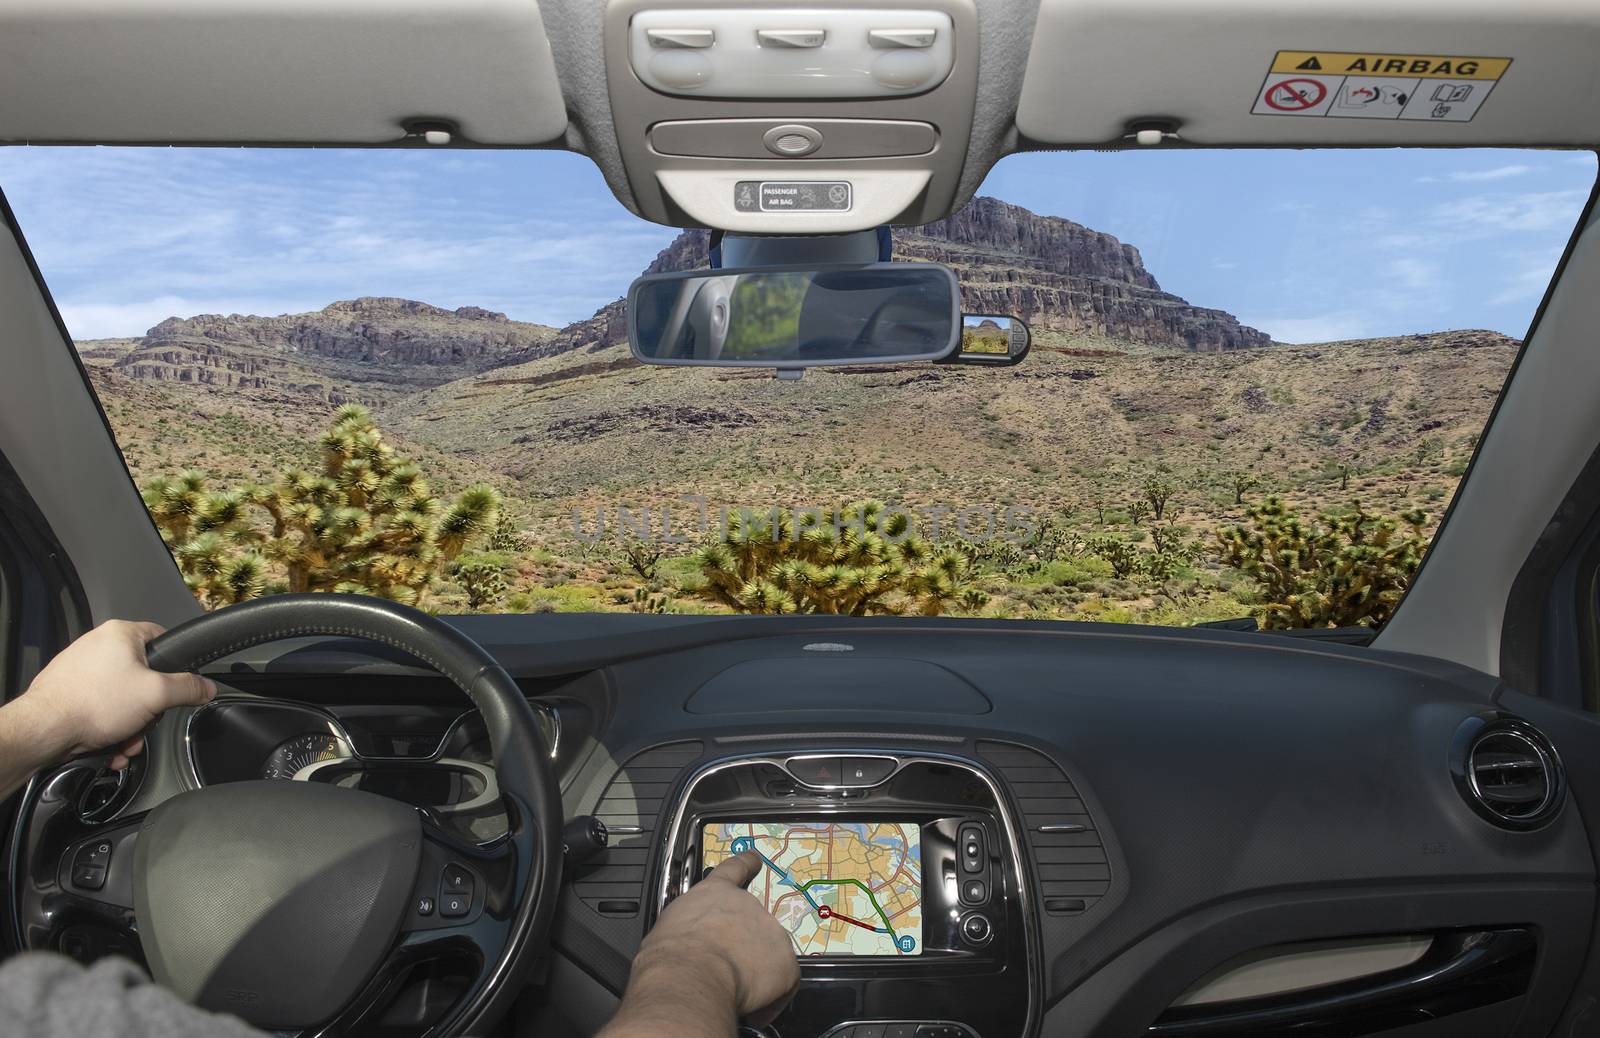 Driving a car while using the touch screen of a GPS navigation system towards Spirit Mountain among joshua trees, Grand Canyon, Arizona, USA